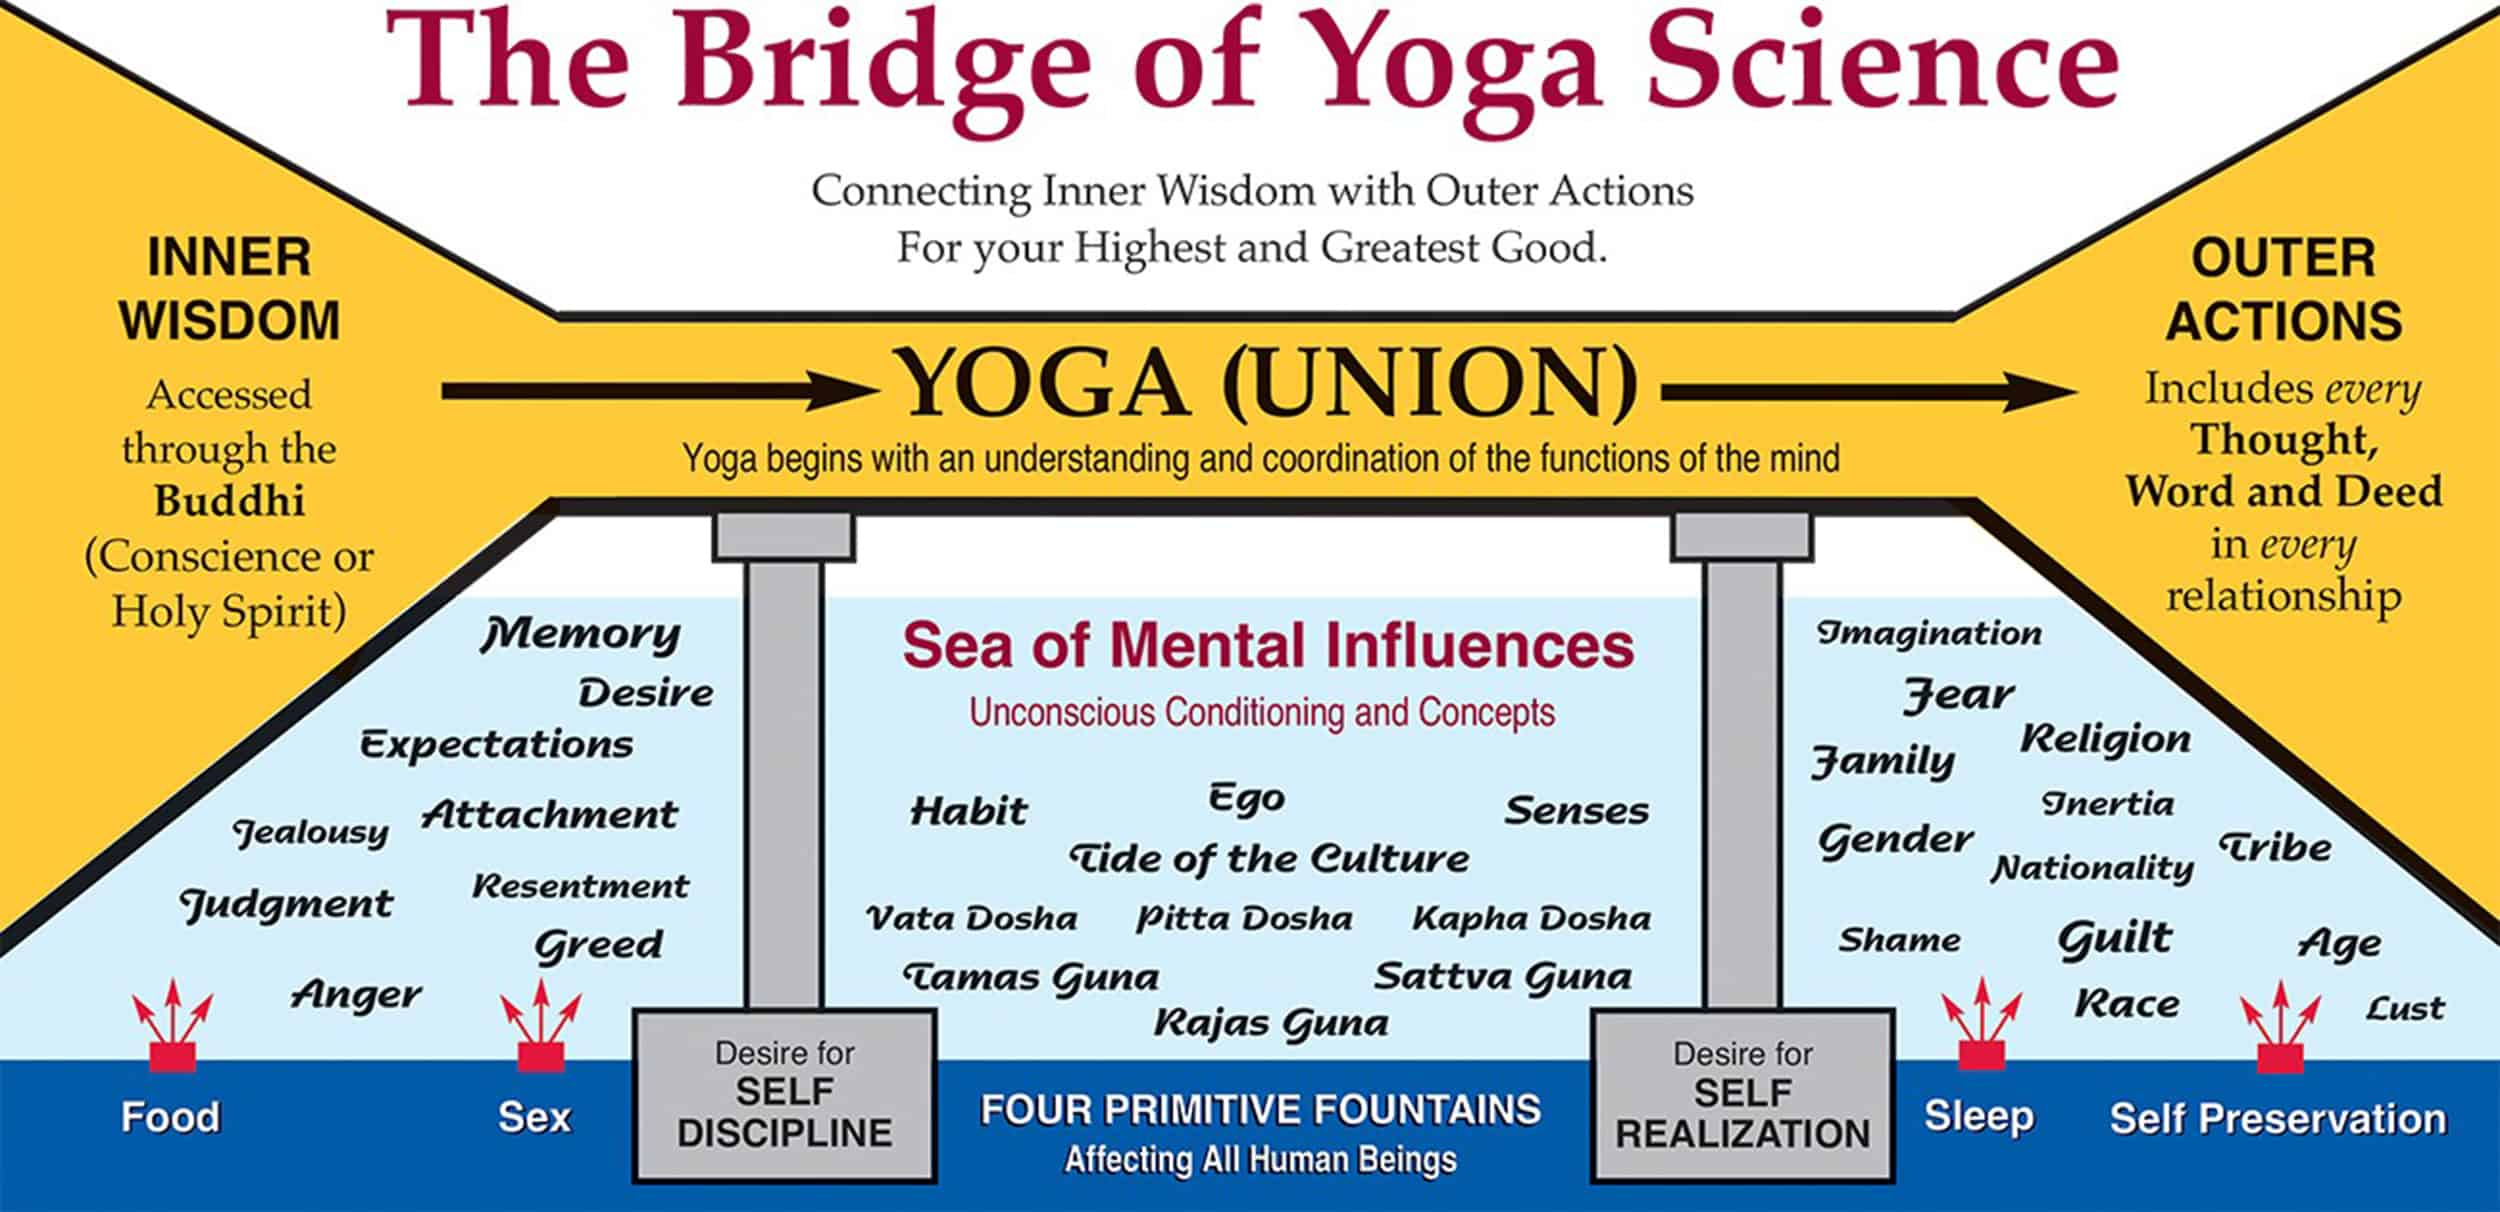 Yoga Science is the oldest body of holistic mind/body medicine. It is 5,000-6,000 years old. 